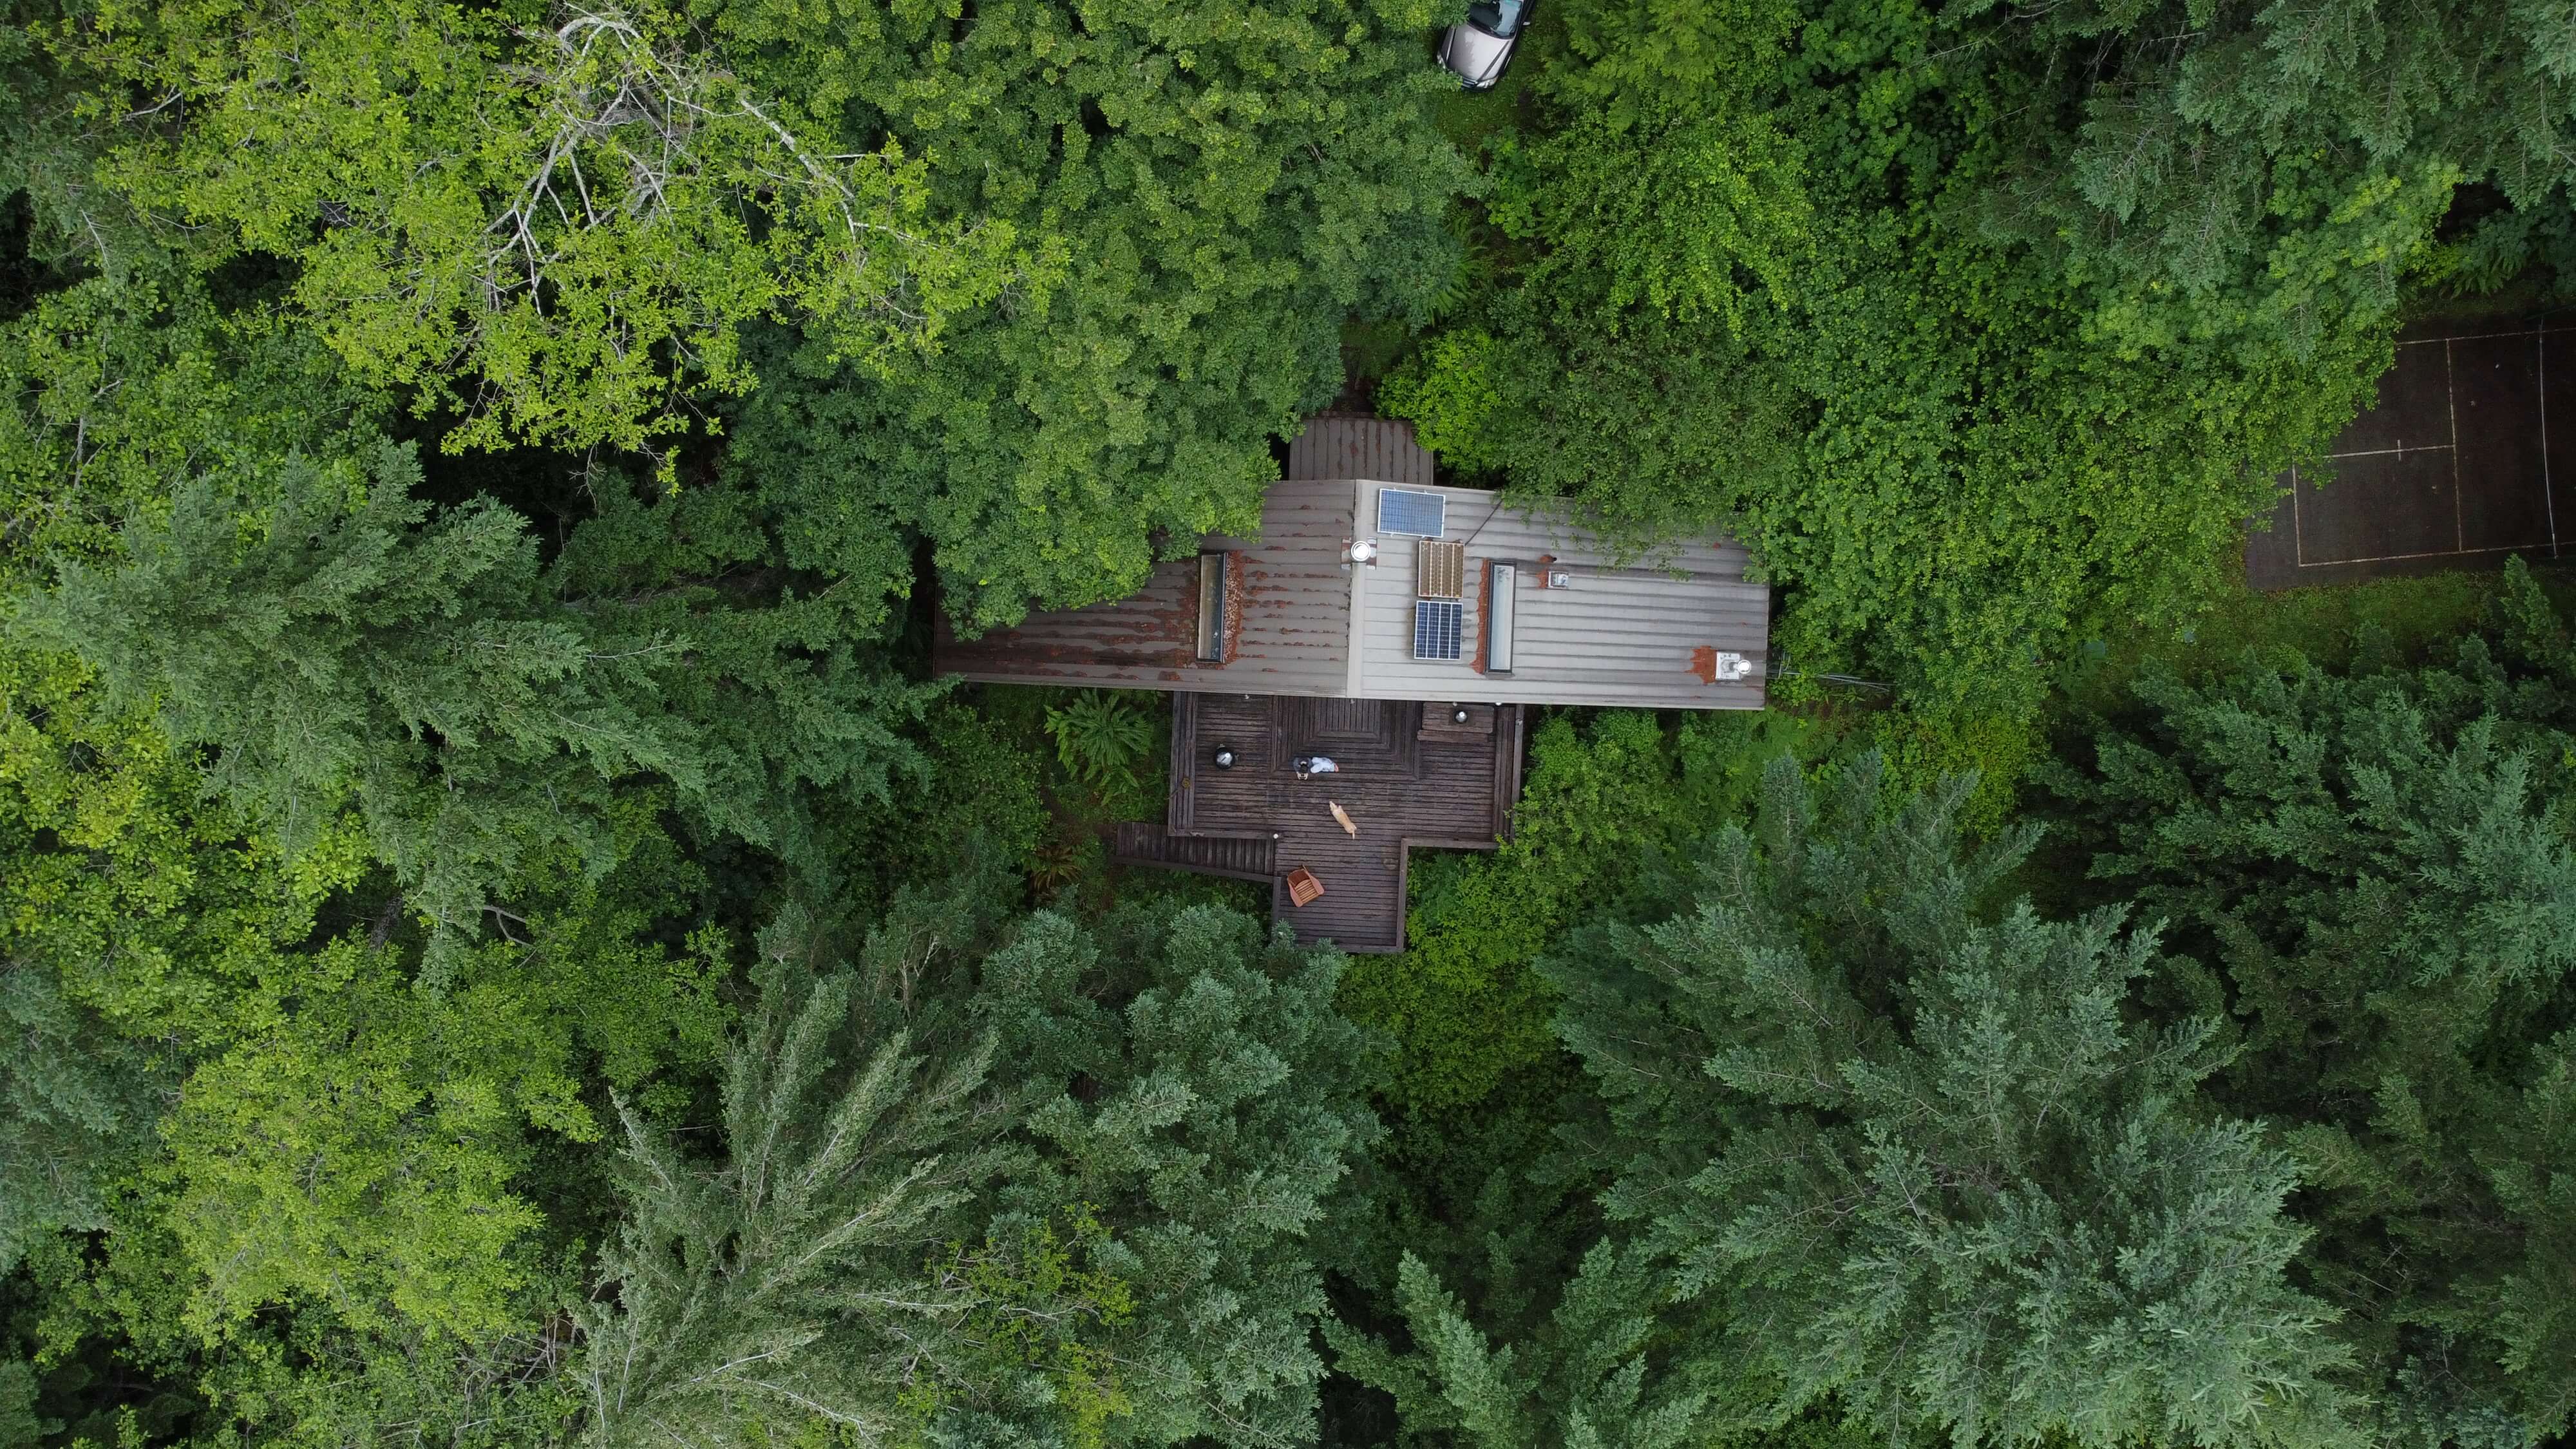 An aerial view of a cabin in a green woods.